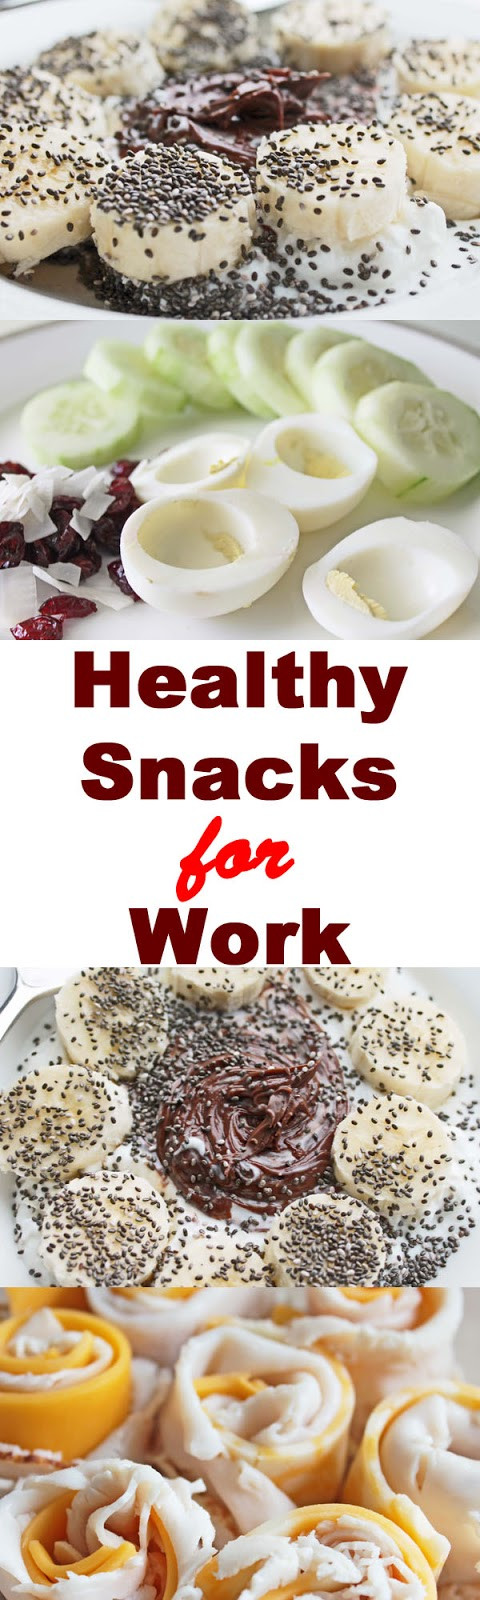 Healthy Afternoon Snacks For Work
 Healthy Snacks for Work Daily Re mendations 13